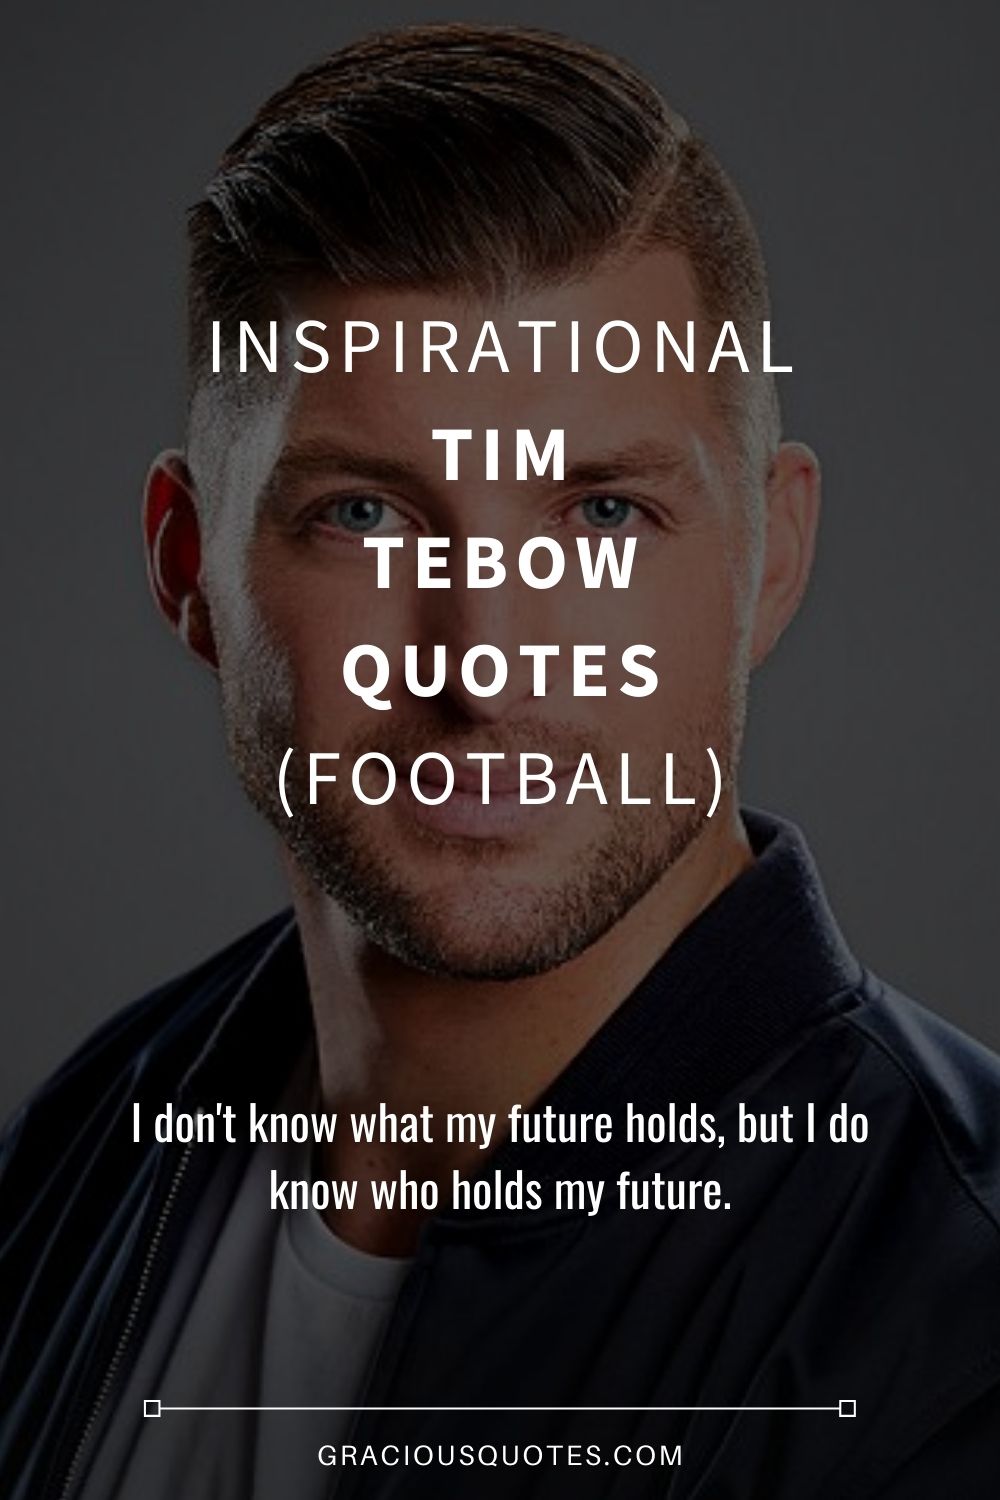 Inspirational Tim Tebow Quotes (FOOTBALL)